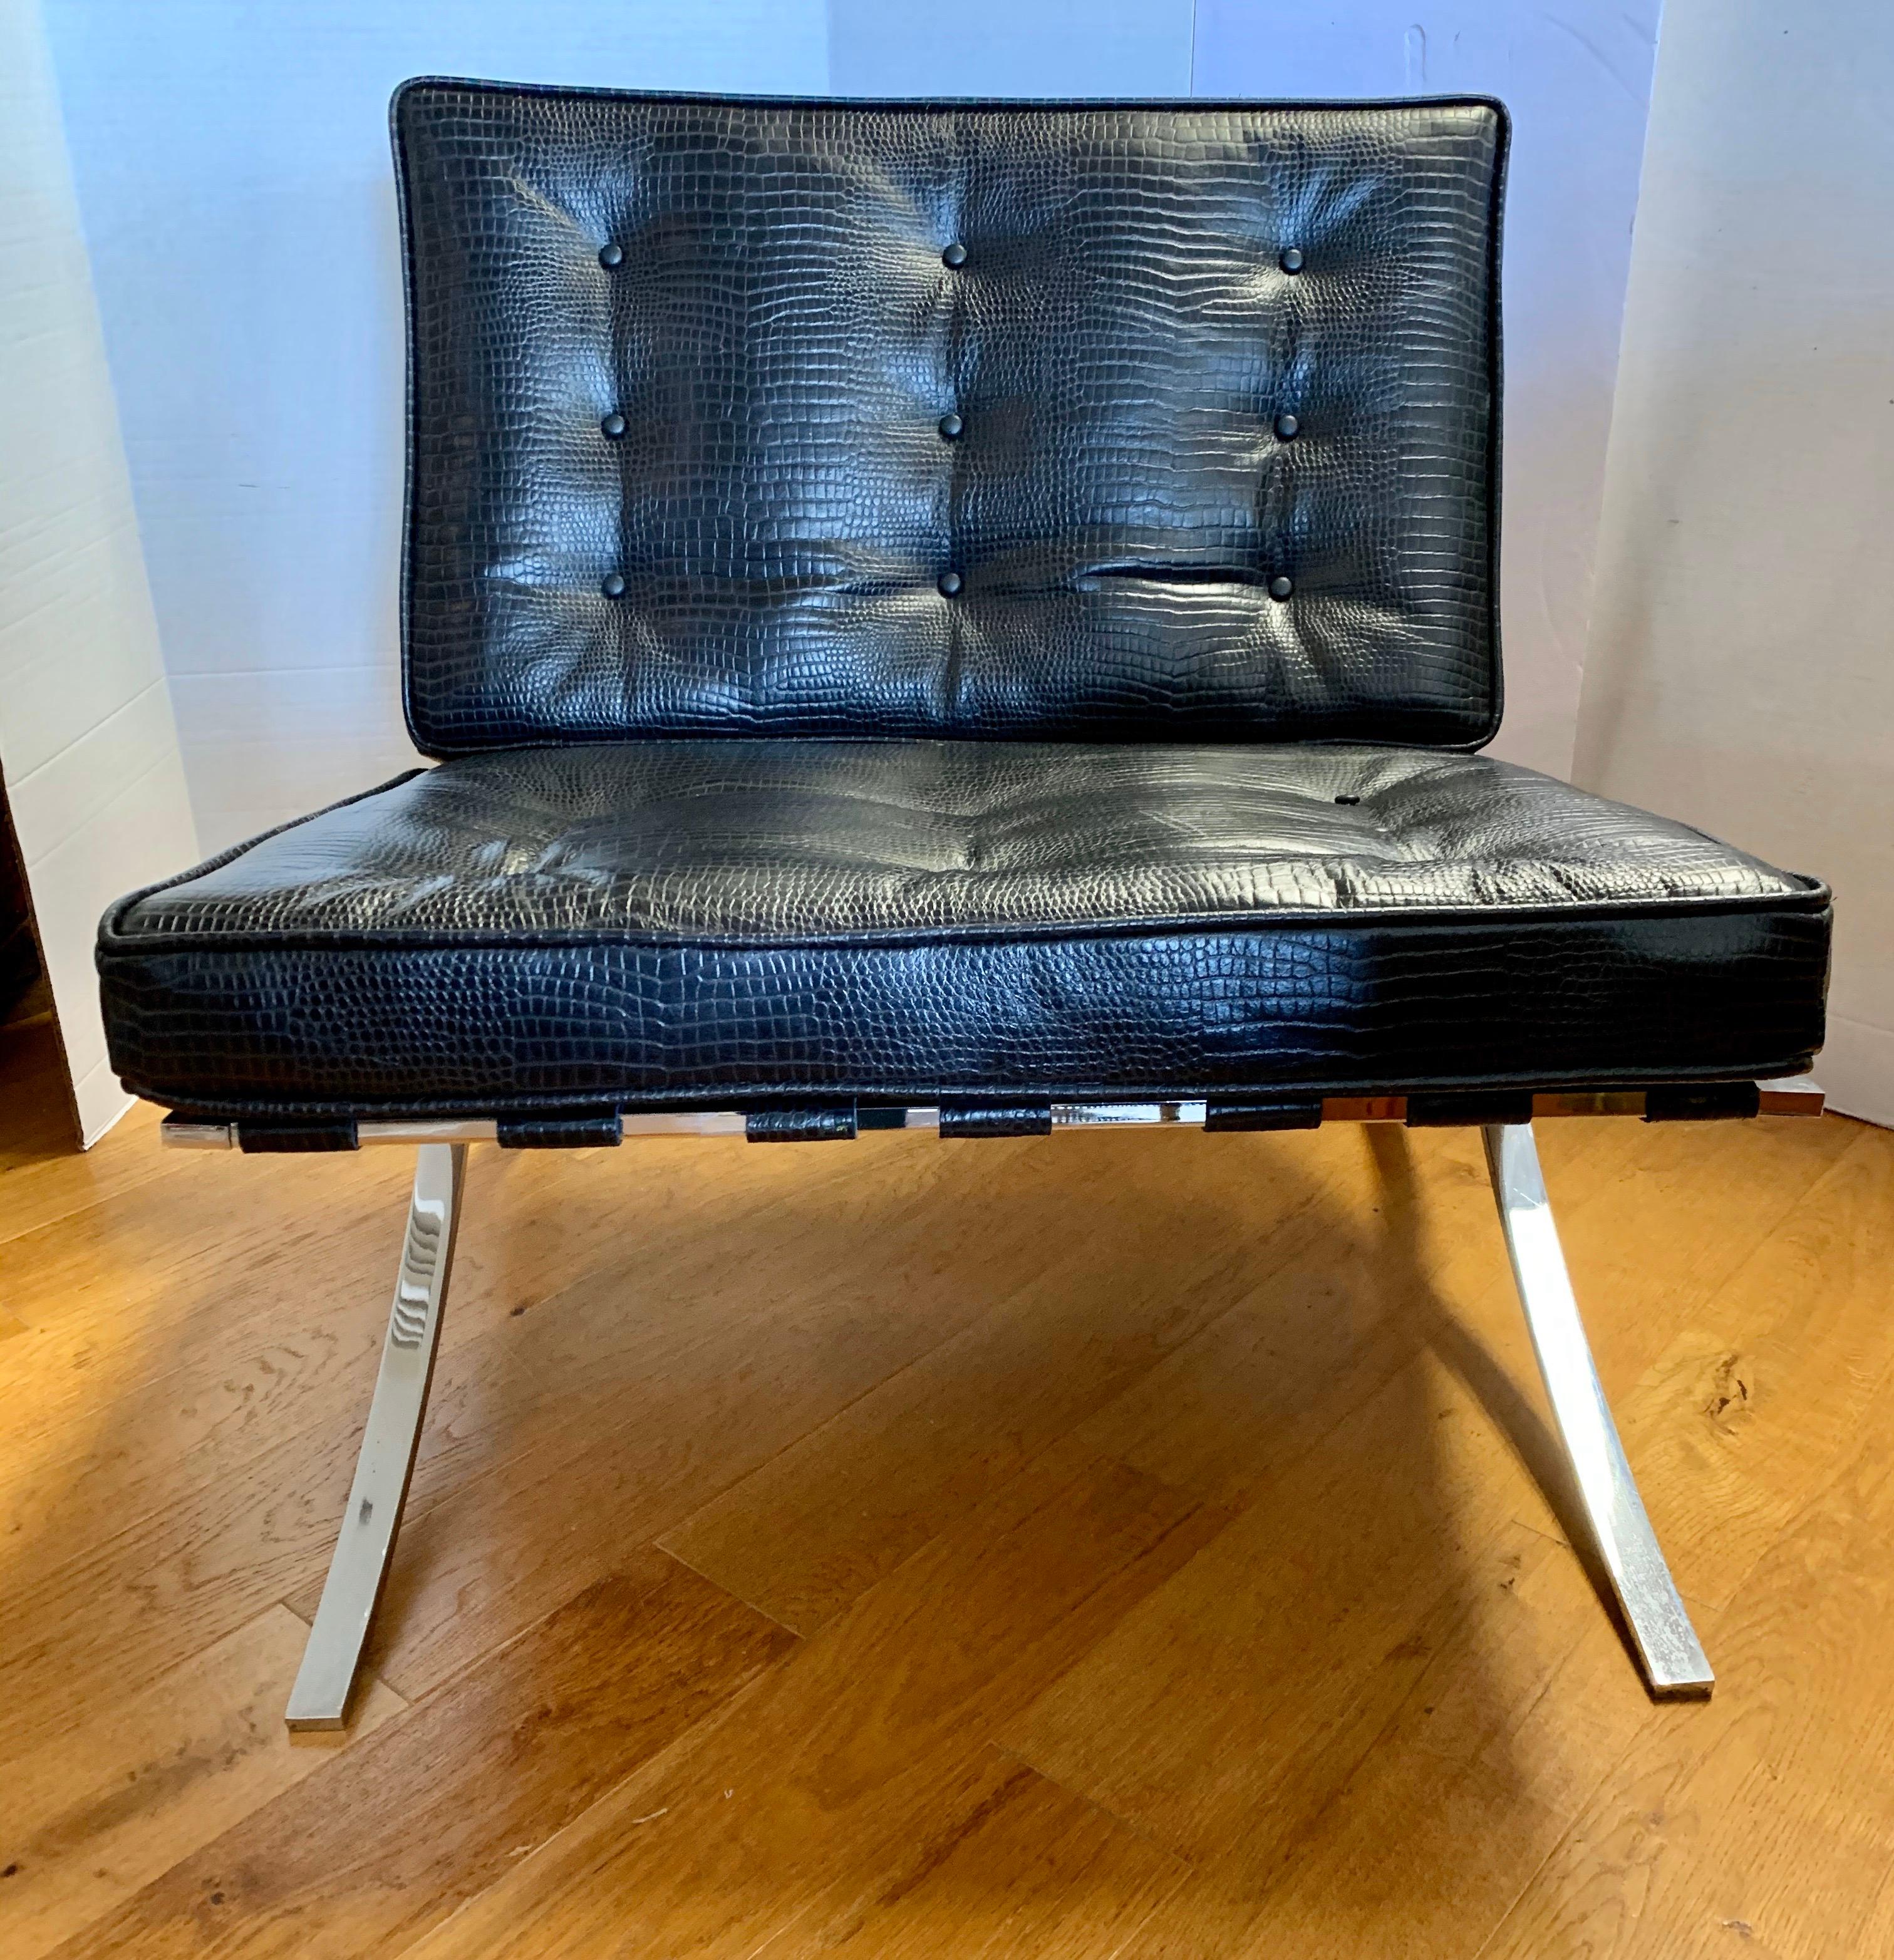 One of the most important and iconic modern chair designs, the Barcelona chair by Ludwig Mies van der Rohe is as stylish and relevant today as when it was first designed in 1929 for the German Pavilion at the Barcelona Exposition. This one is